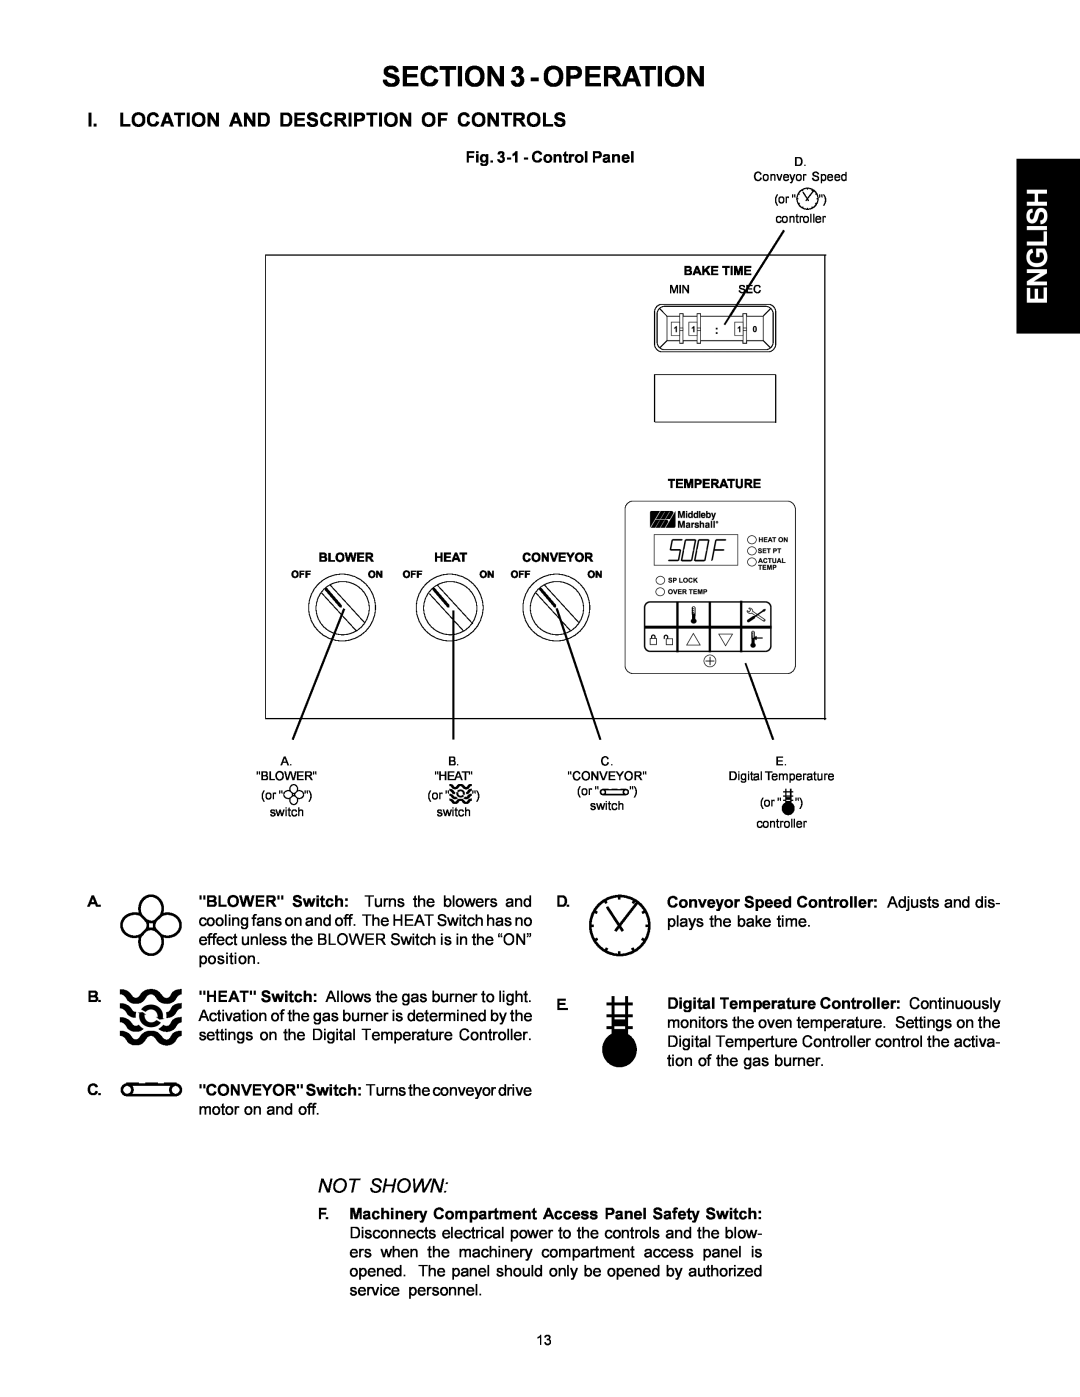 Middleby Marshall PS314SBI installation manual Operation, English, I.Location And Description Of Controls, Not Shown 